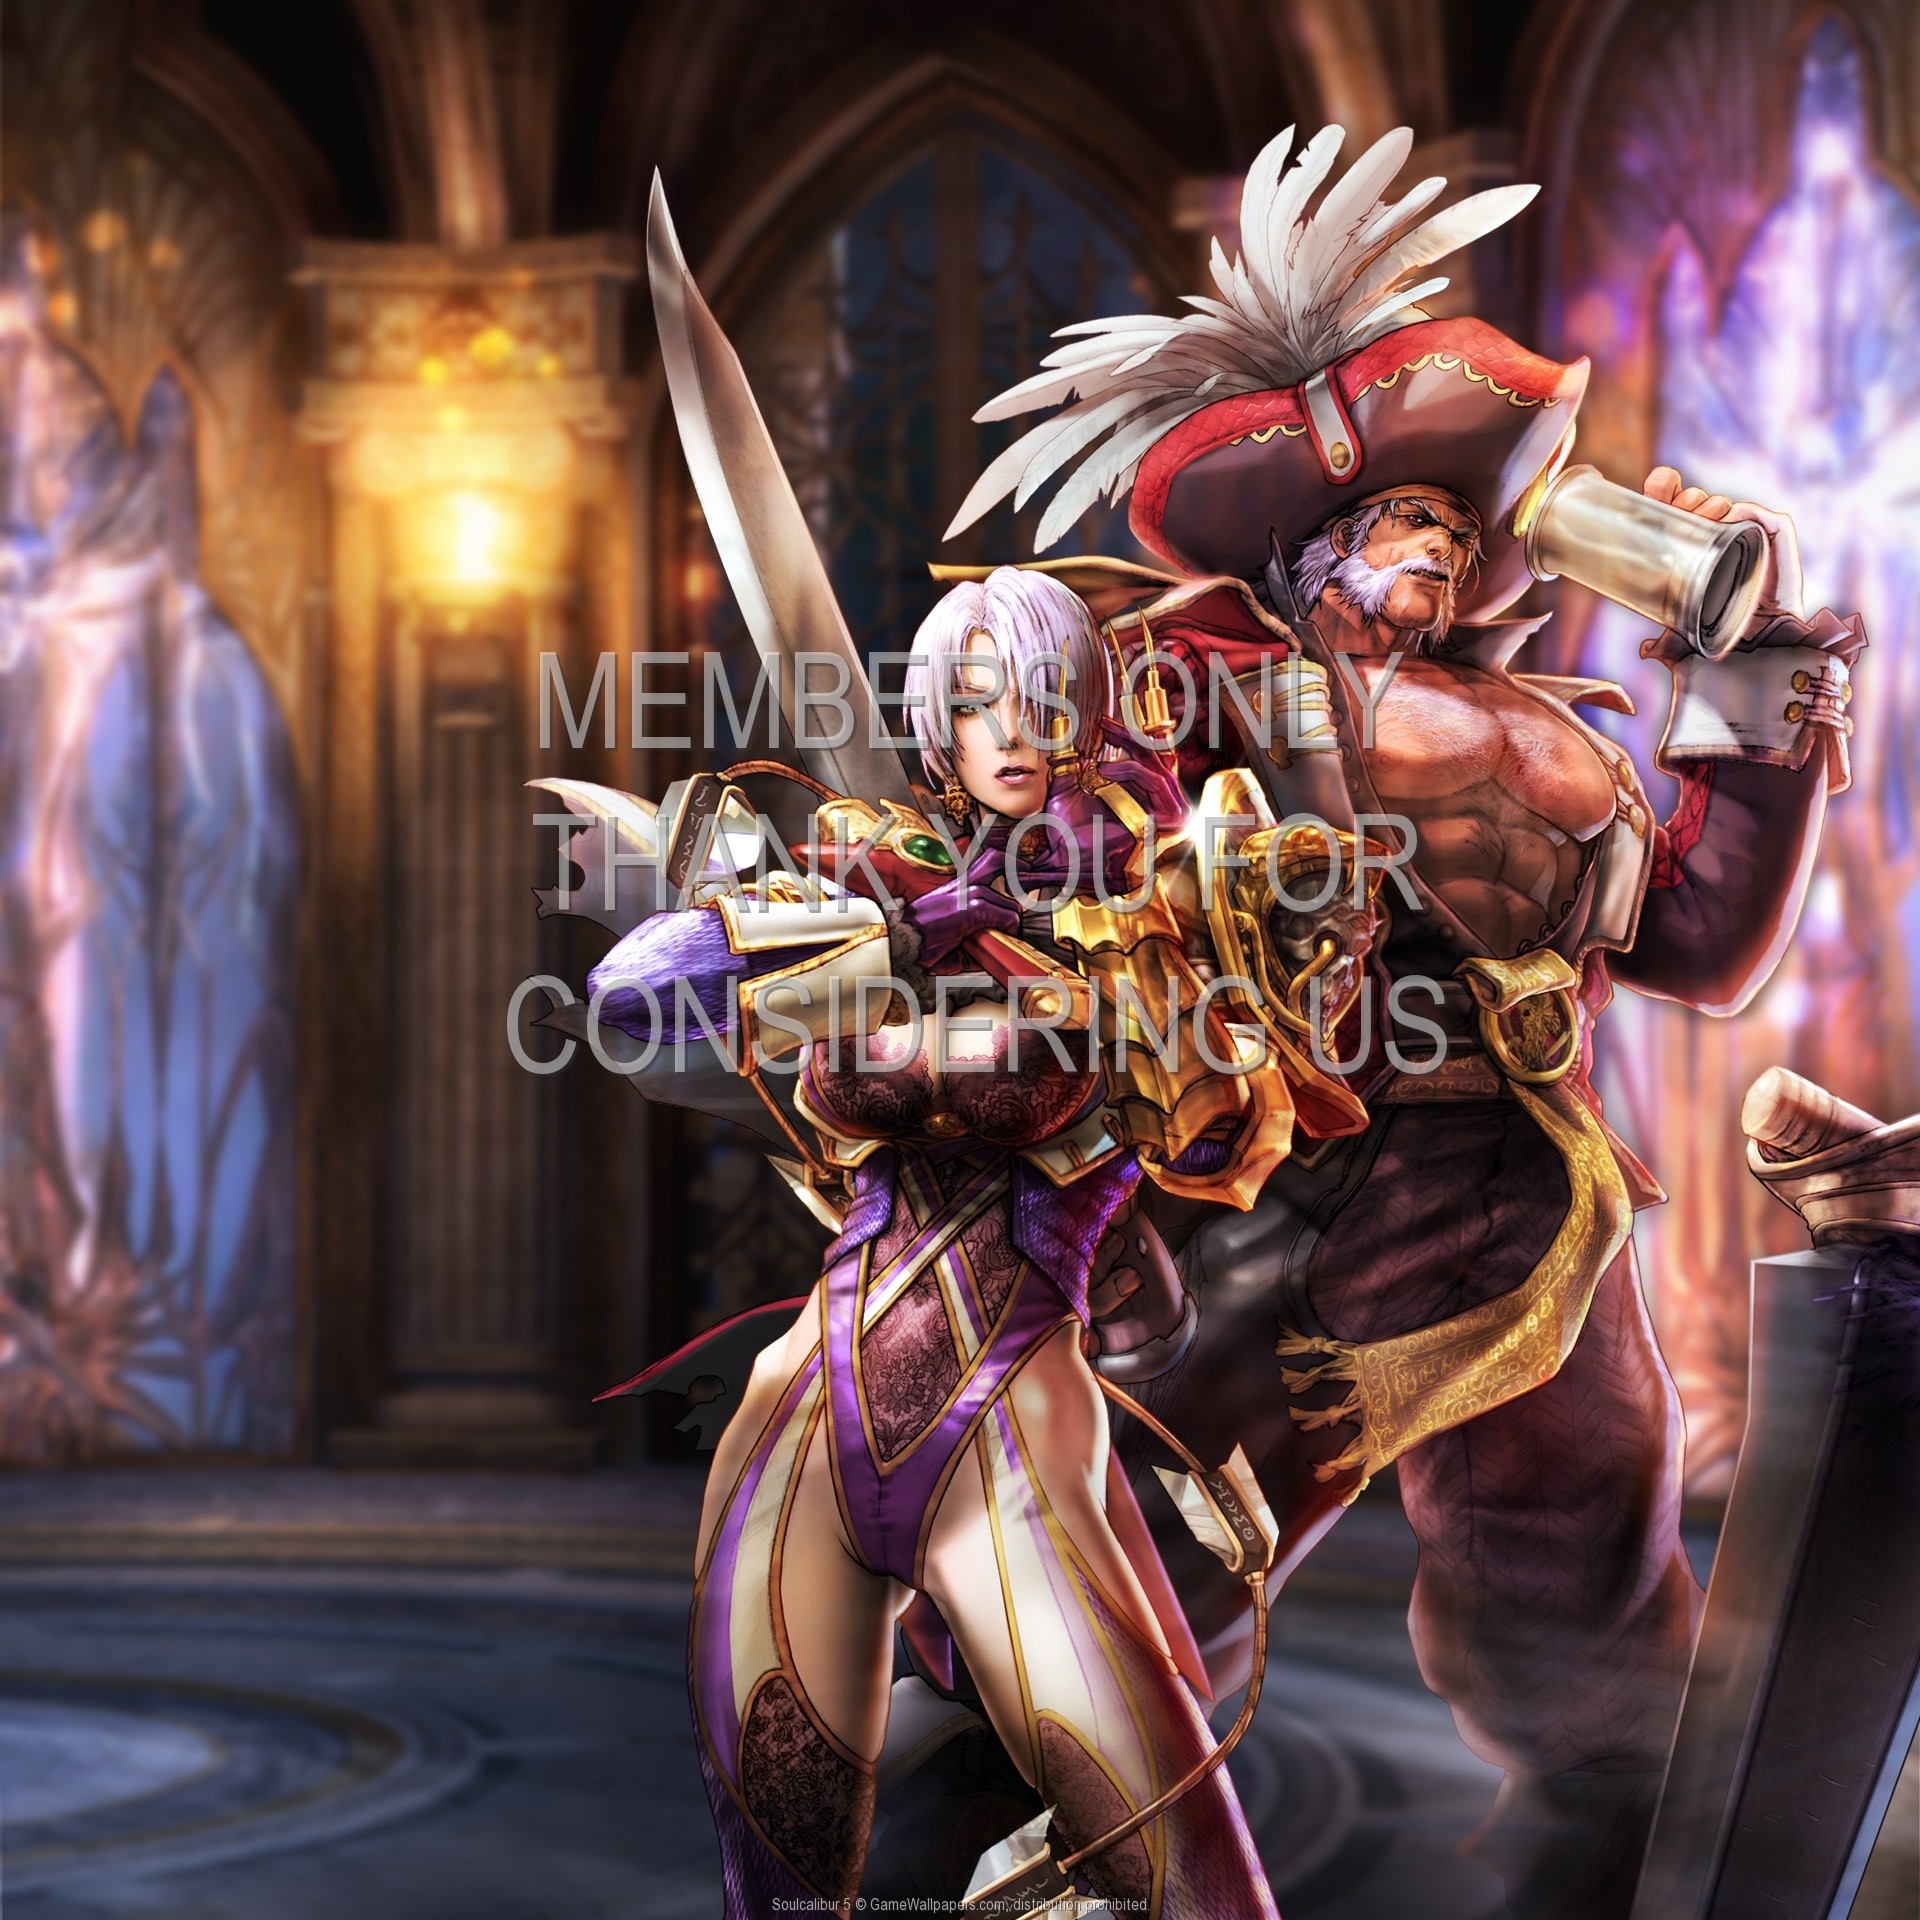 1920x1920 Soulcalibur 5 1920x1080 Mobile wallpaper or background 03